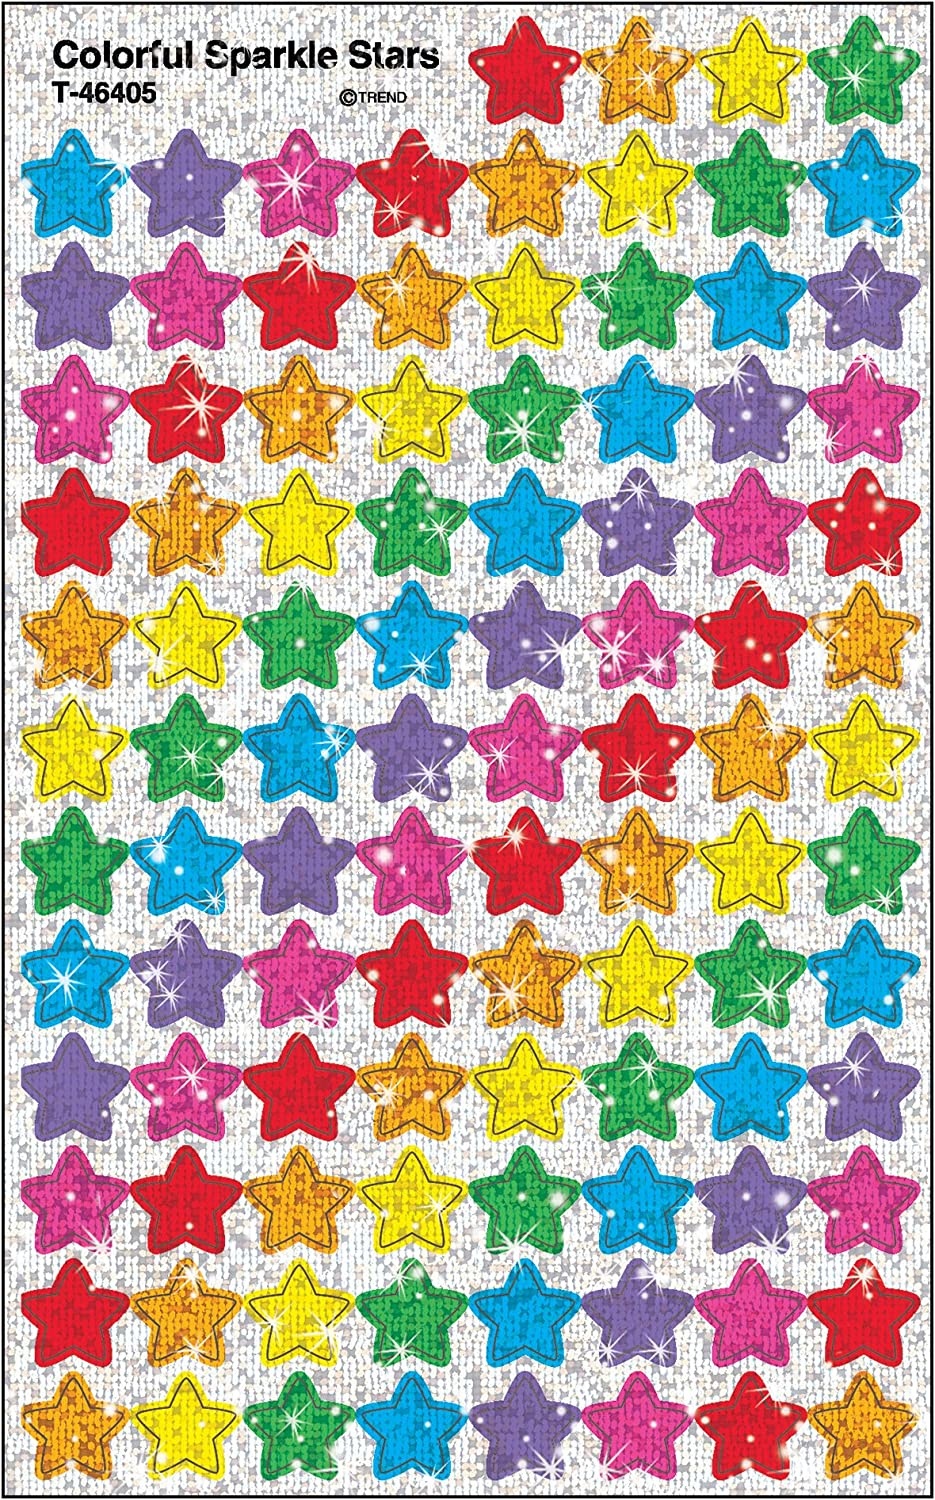 Trend Super Shapes Stars Stickers